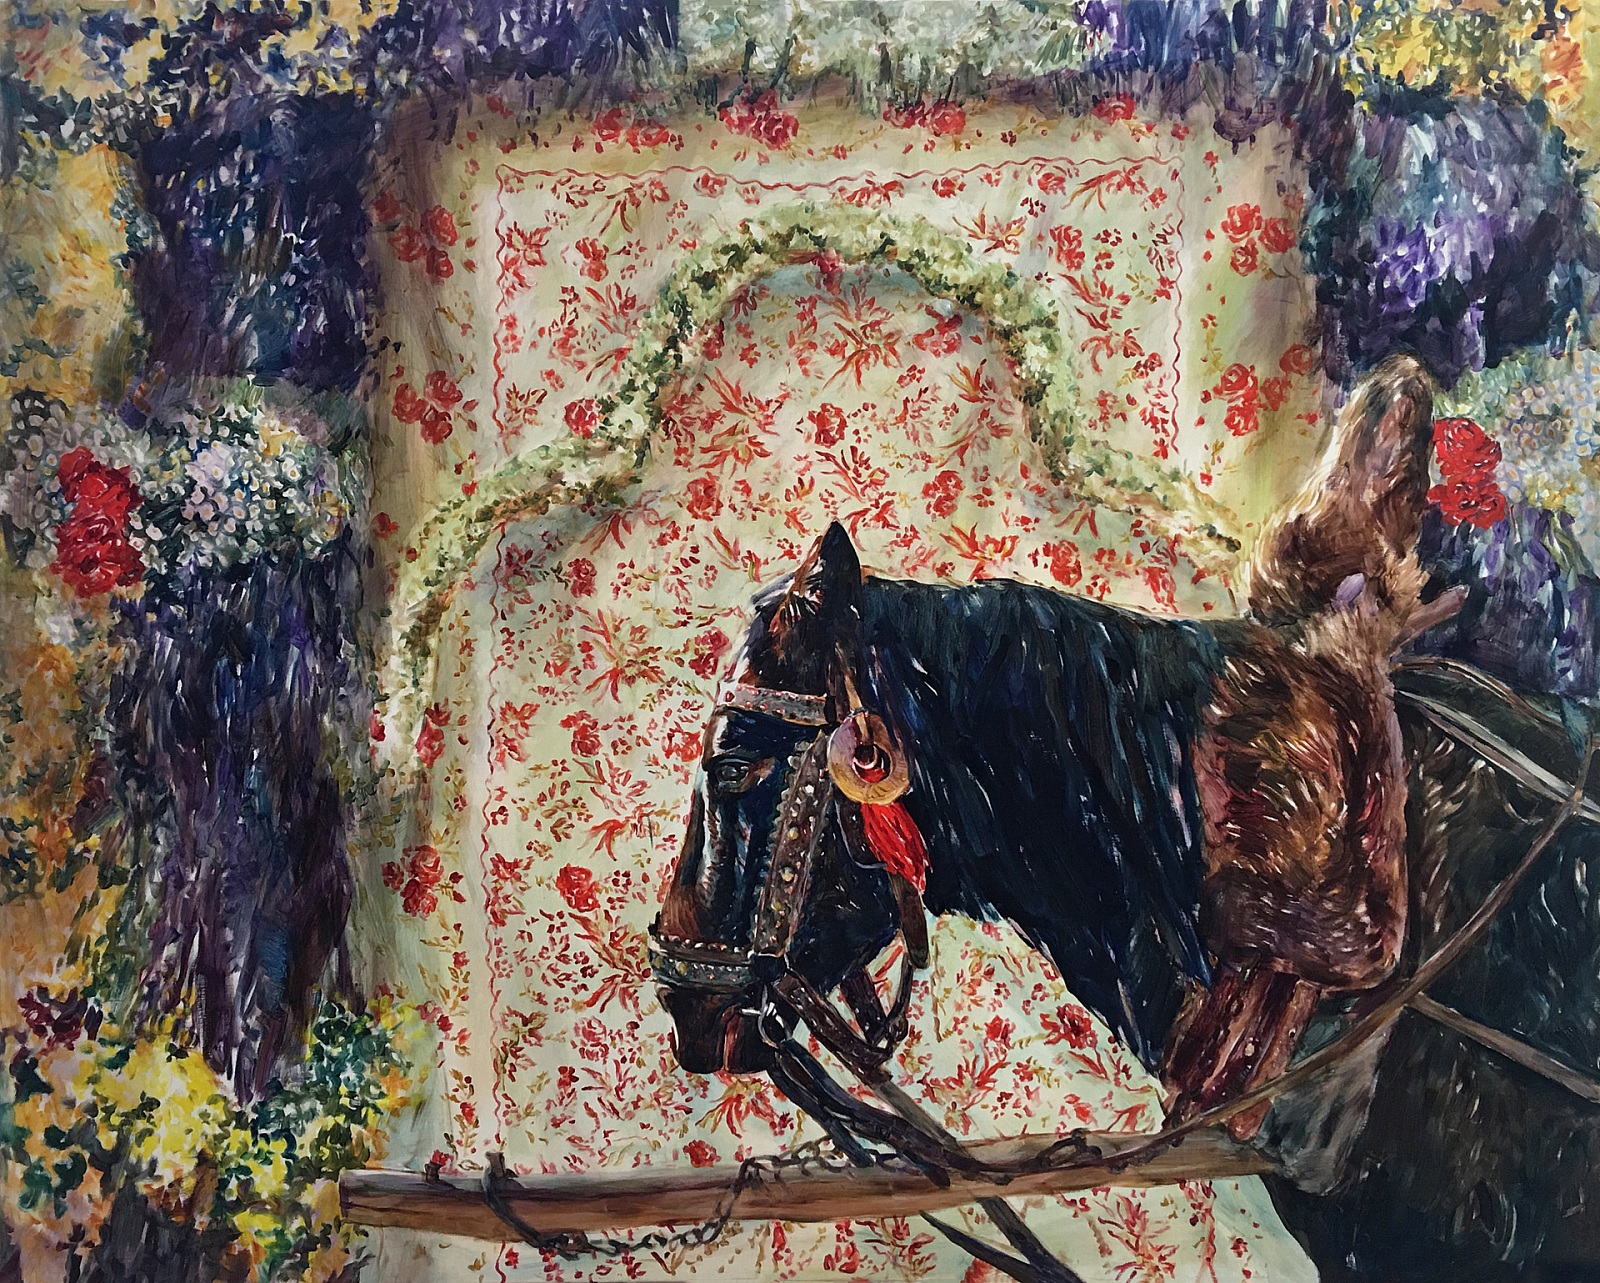 Horse with Flowers - 2018, oil on canvas, 160 X 312 cm, private collection, RO - 19